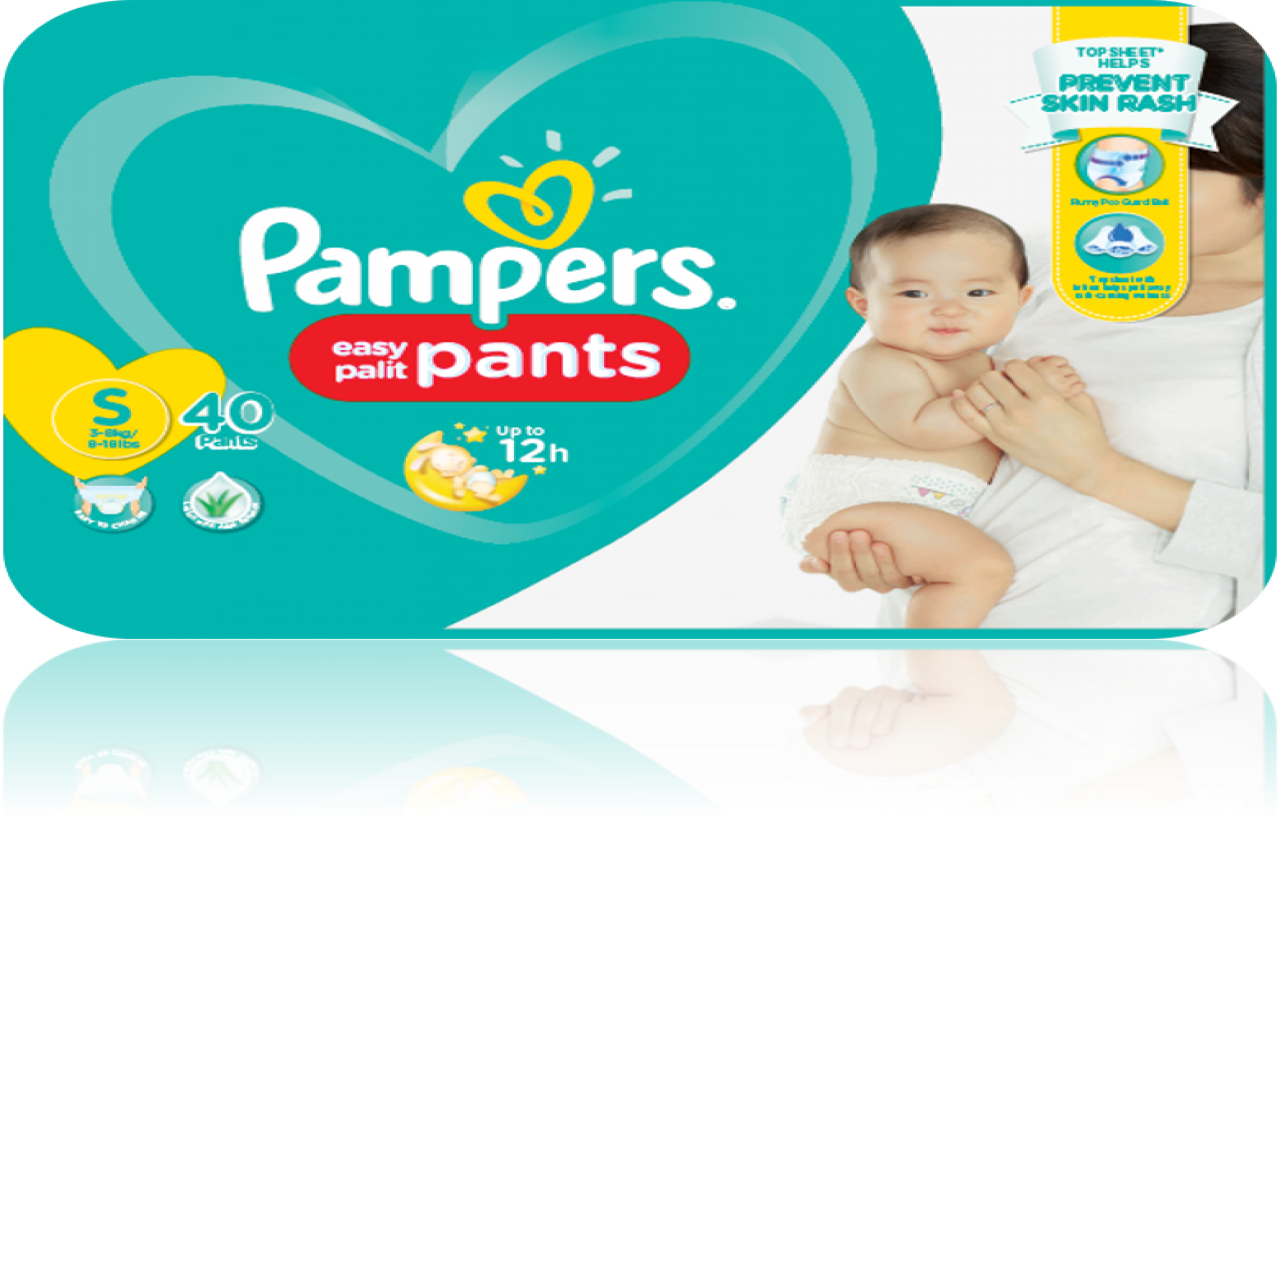 PAMPERS BBYDRY PNTSVALUE S 40S